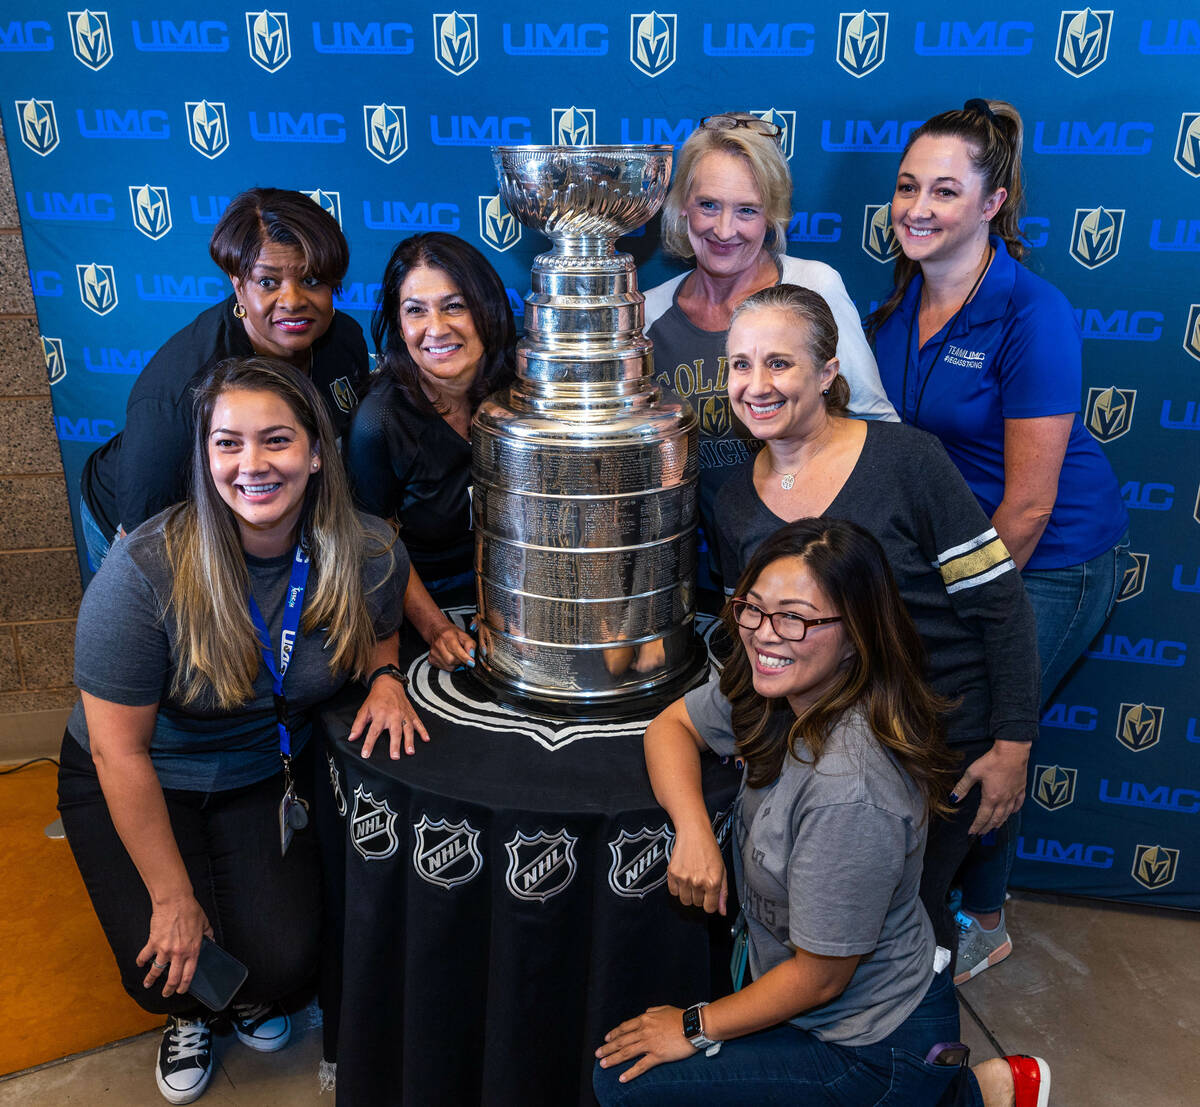 UMC Hospital Quality Department workers pose with the Stanley Cup during a visit for employees ...